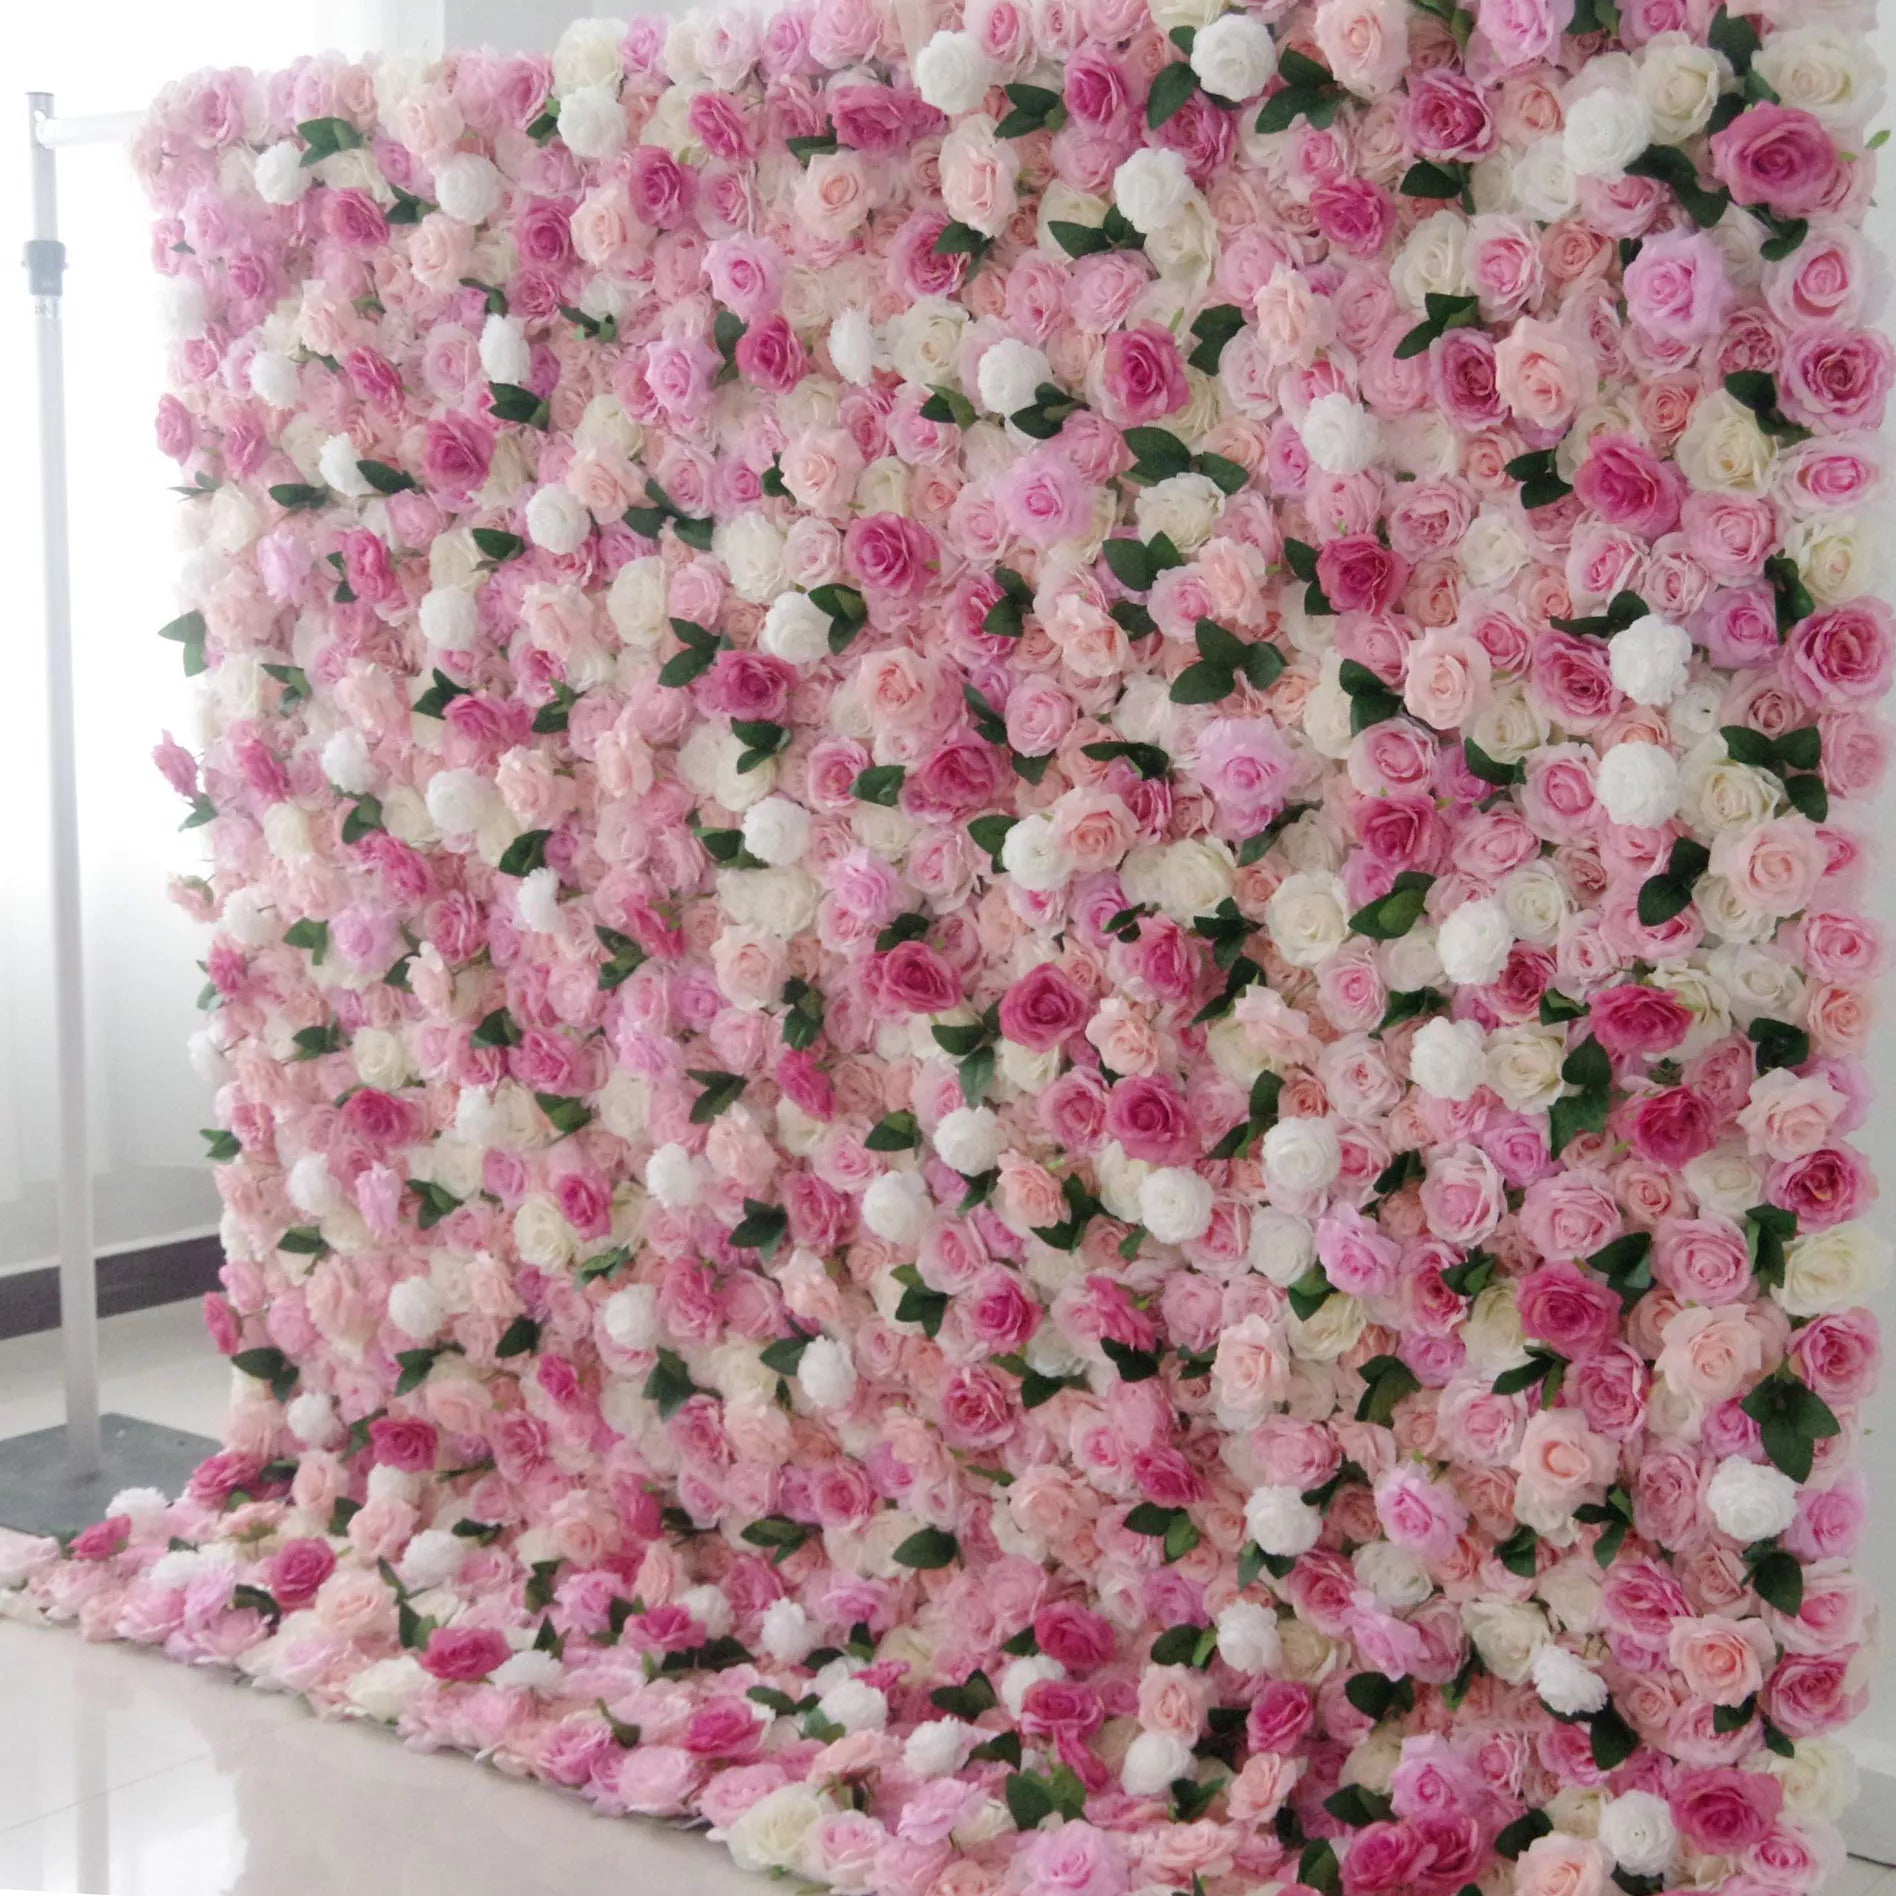 Valar Flowers artificial mixed pink and white floral wall roll up fabric for wedding backdrop, floral party decor, and event photography, model VF-0841